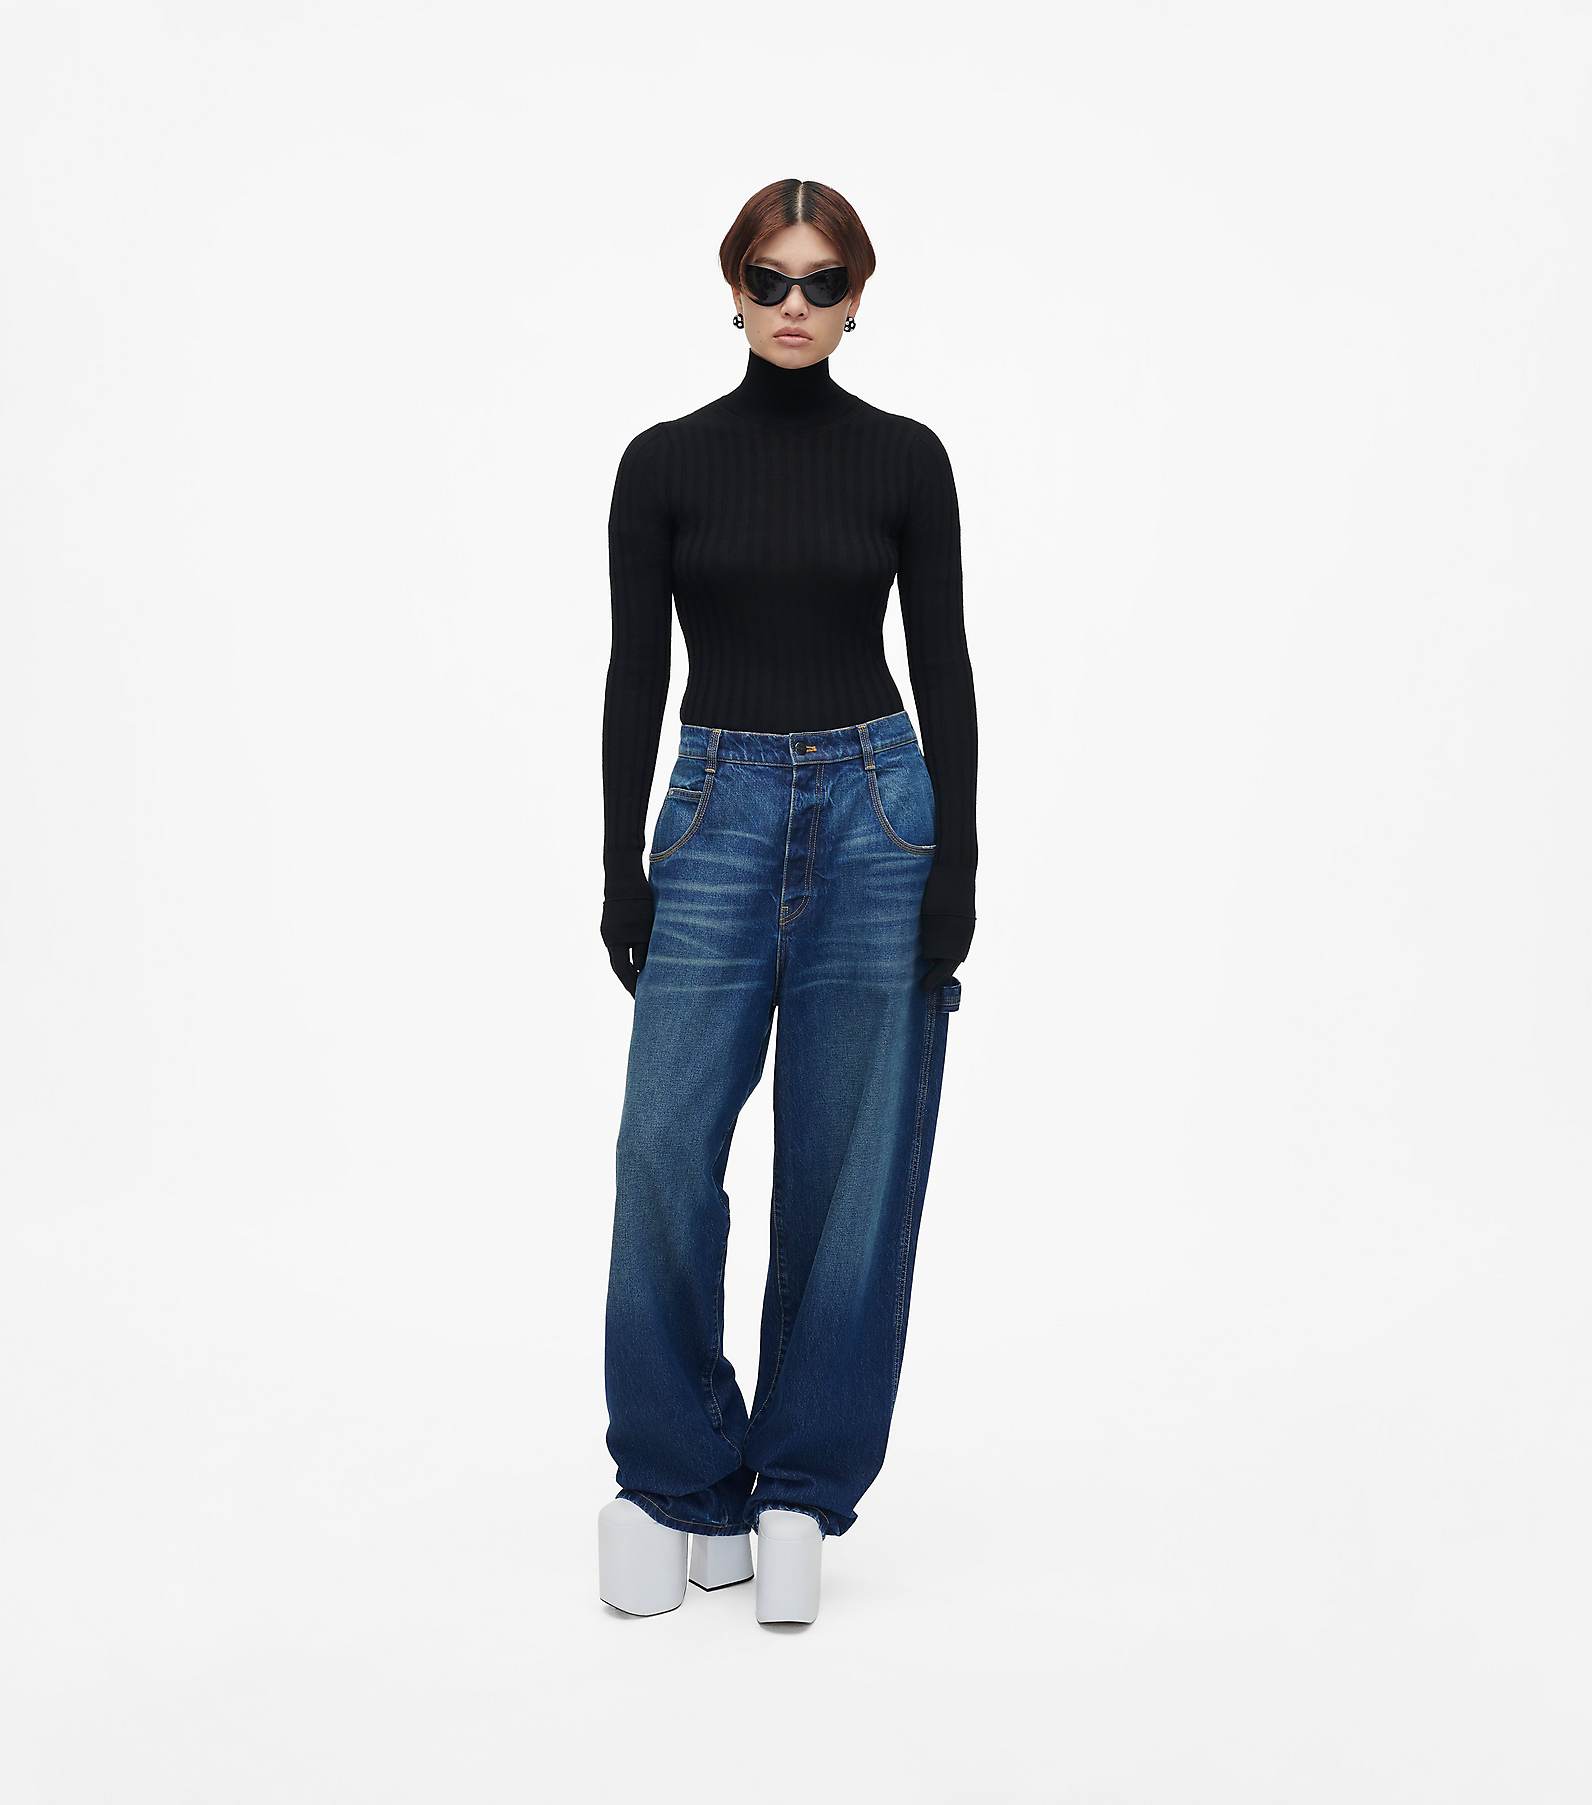 The Oversized Jeans, Marc Jacobs